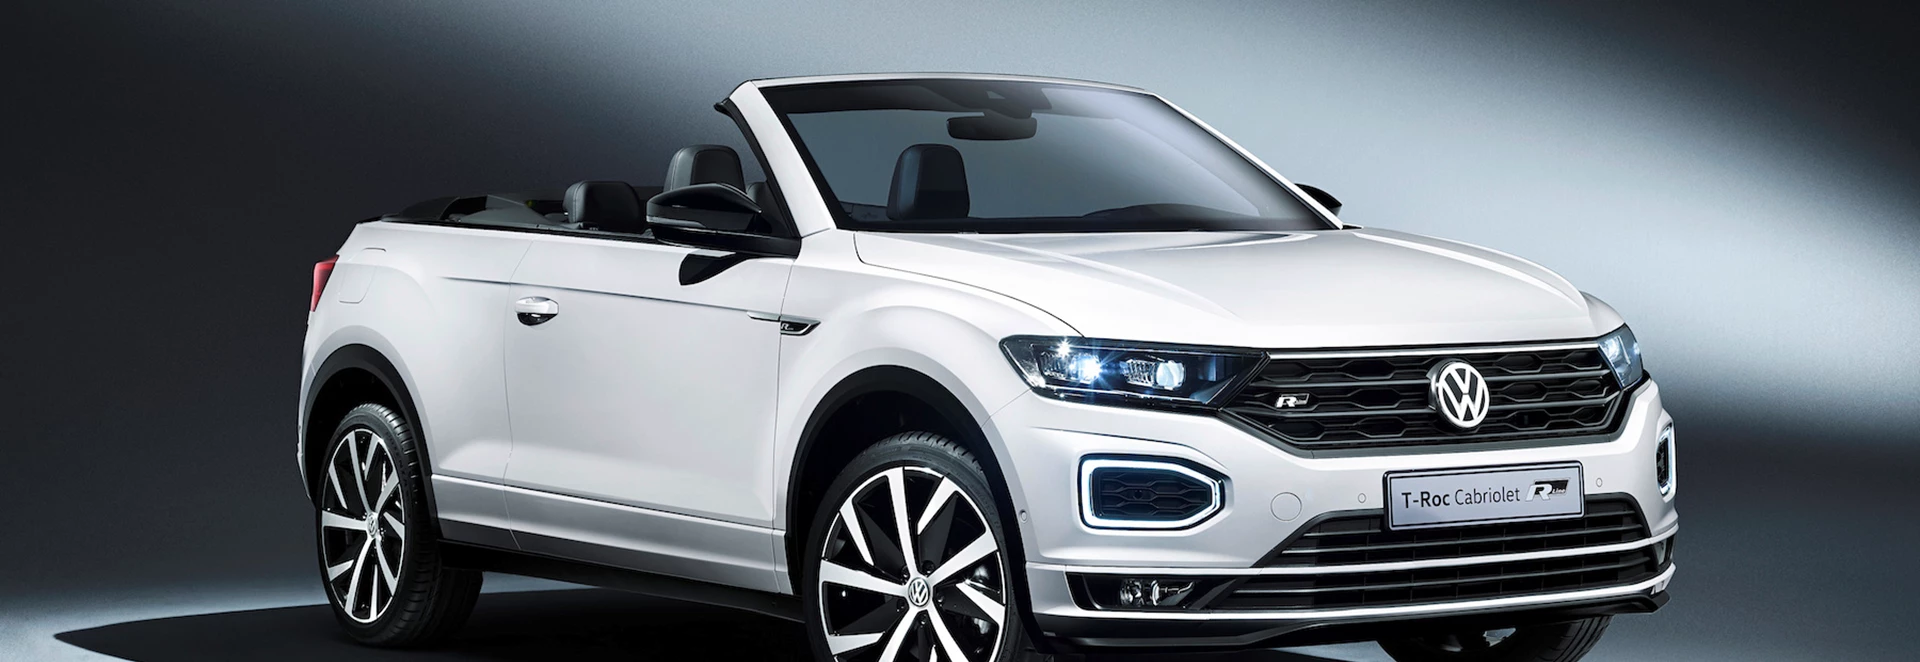 Prices announced for Volkswagen T-Roc Cabriolet